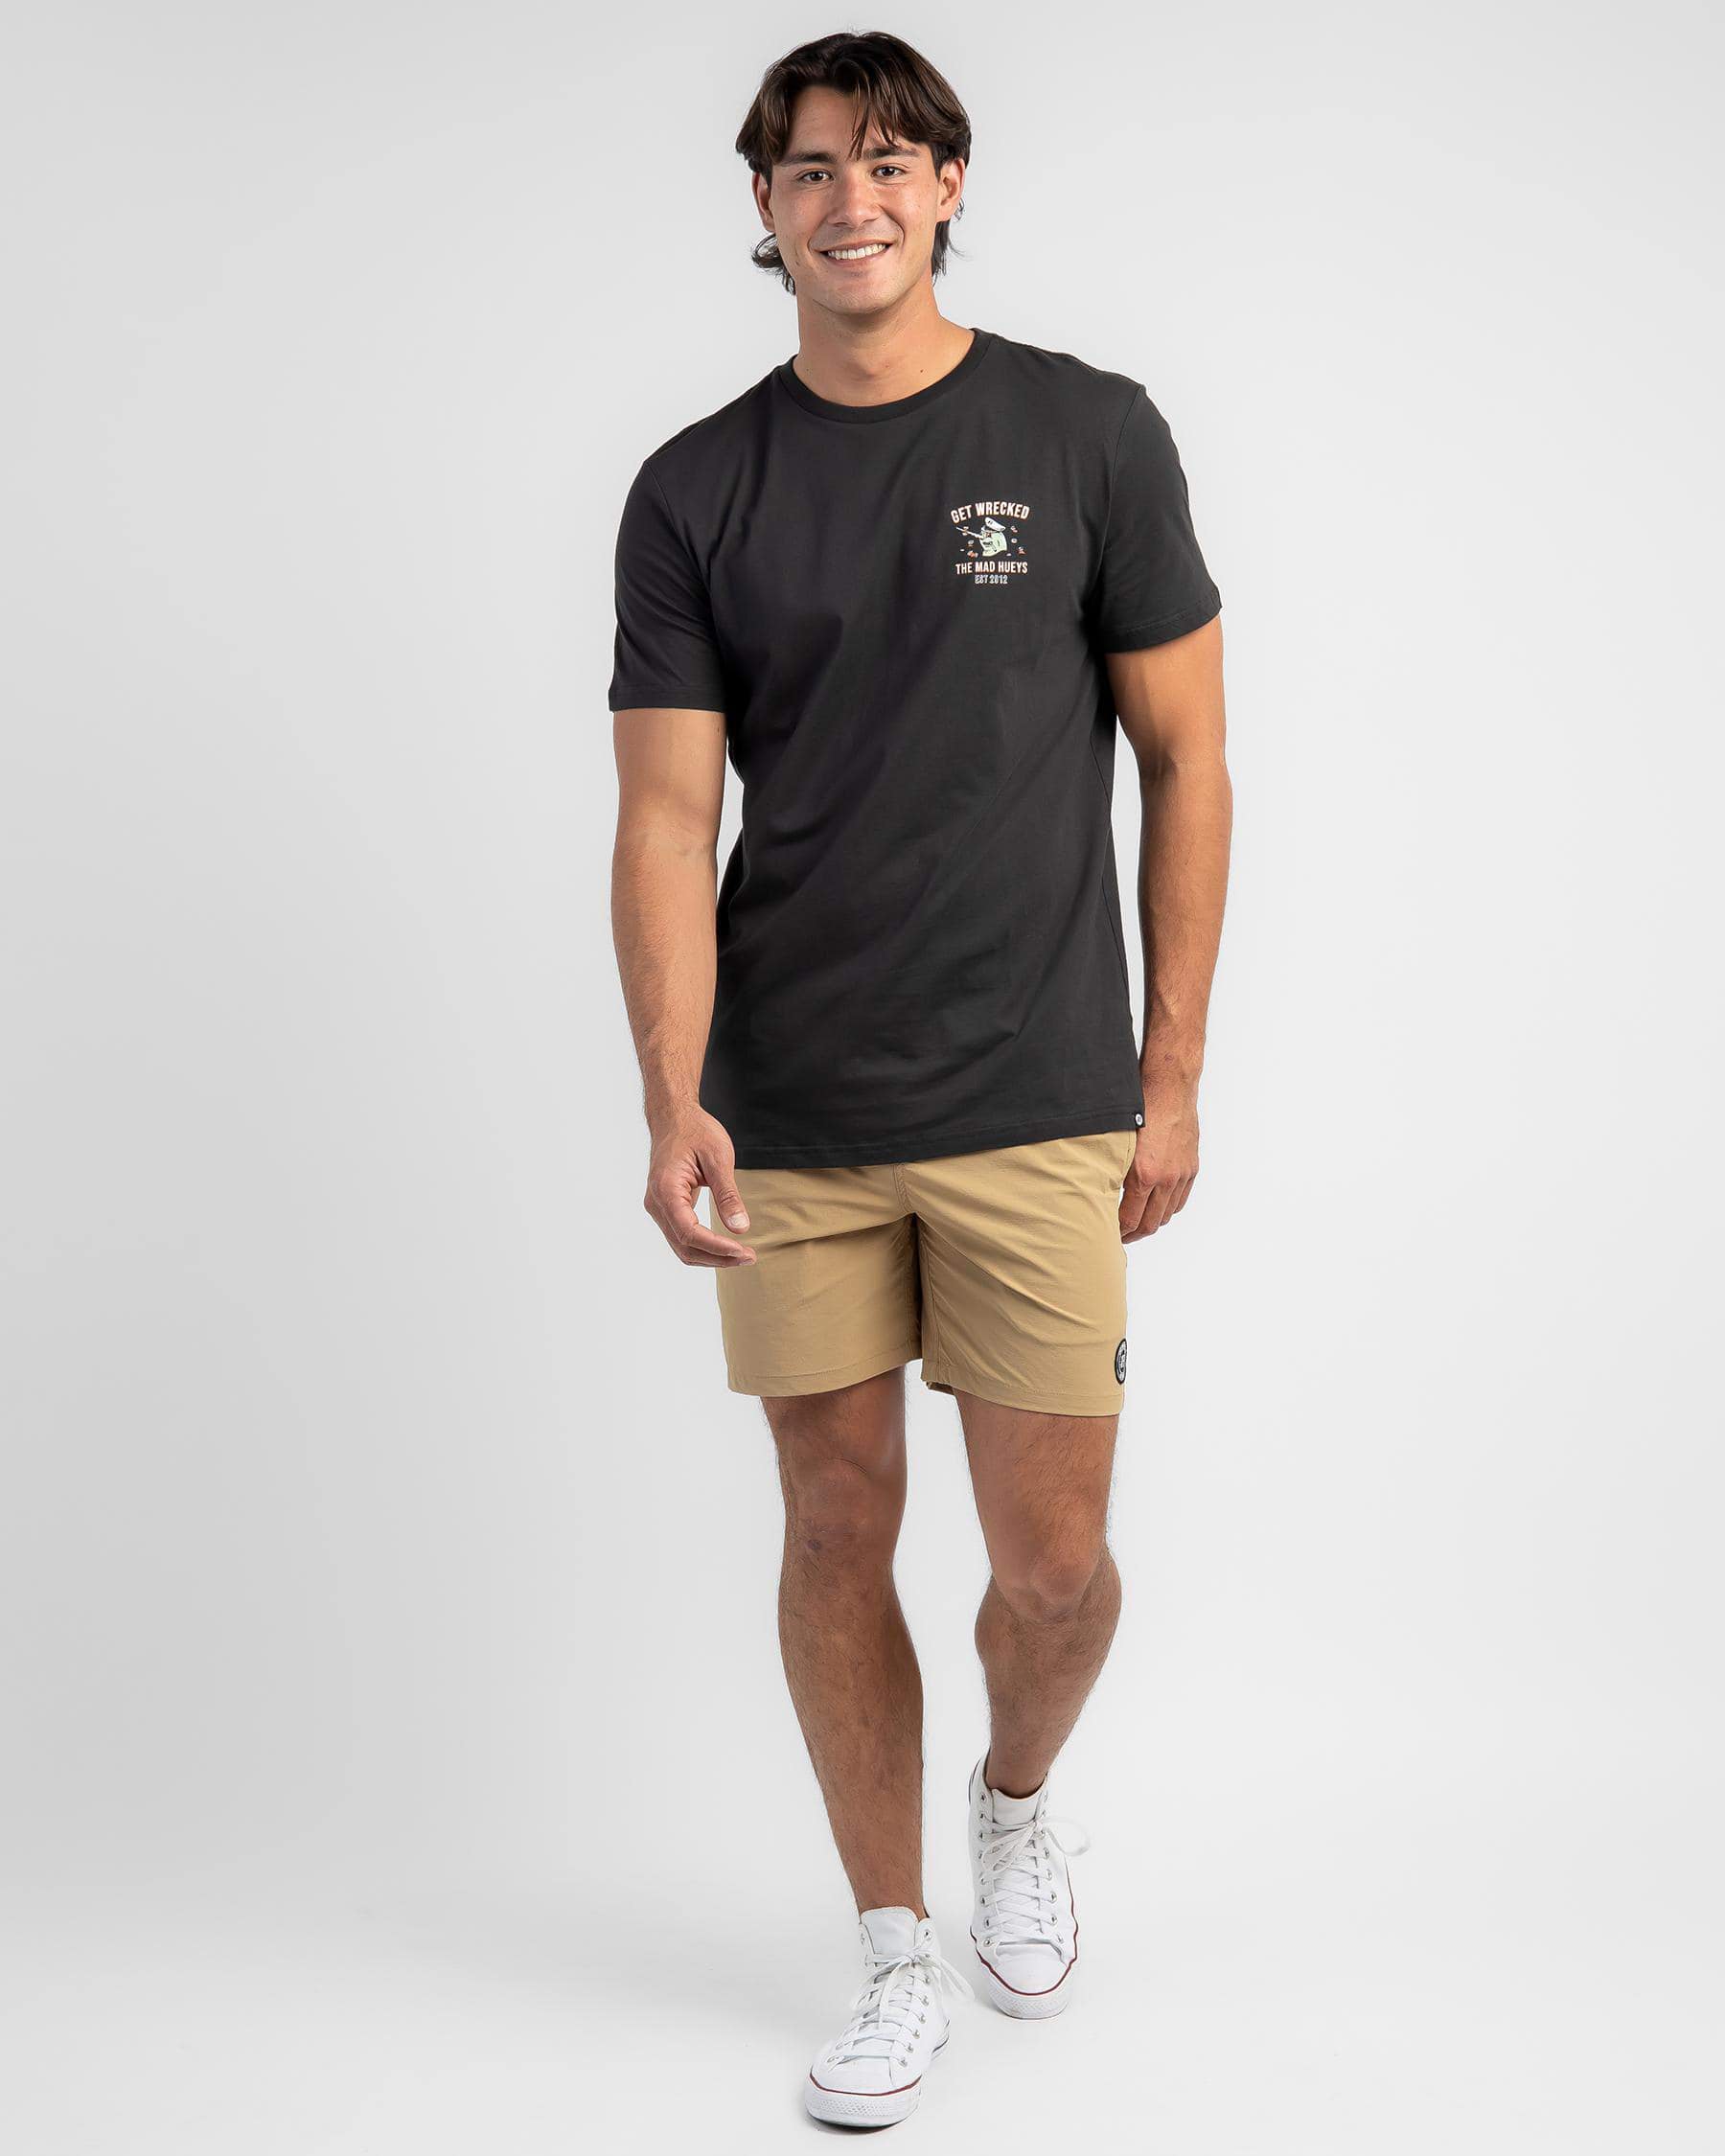 GETTING WRECKED SS TEE VINTAGE BLACK THE MAD HUEYS MENS SHORT SLEEVE